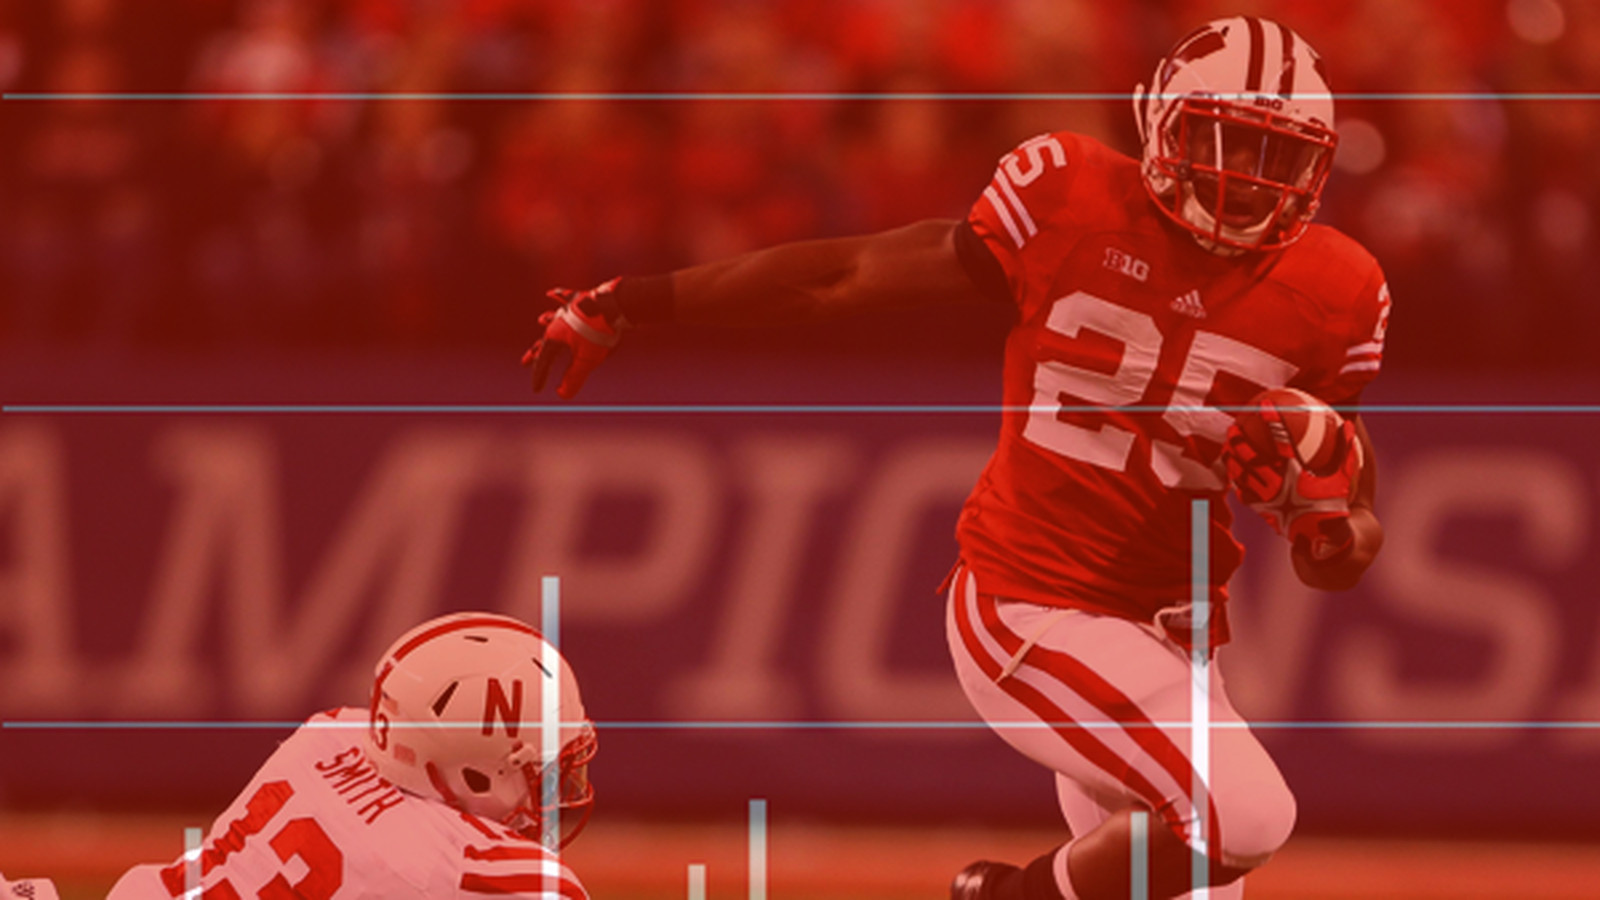 Chart Party: Melvin Gordon broke the all-time rushing record in 3 quarters  